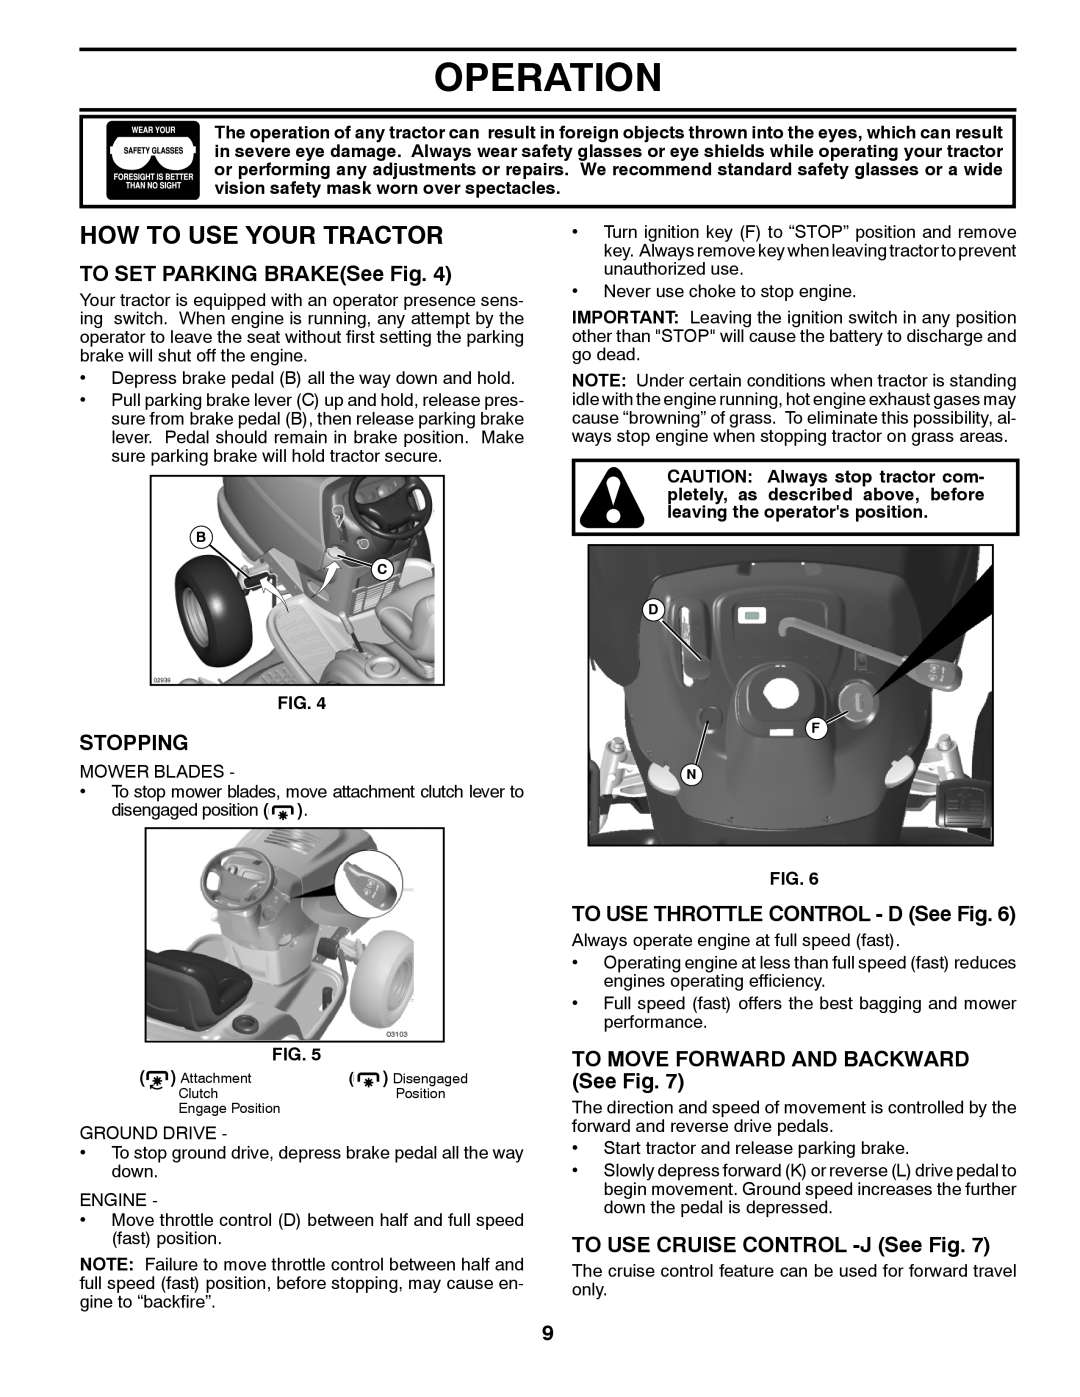 Poulan 412412 manual How To Use Your Tractor, TO SET PARKING BRAKESee Fig, Stopping, TO USE THROTTLE CONTROL - D See Fig 